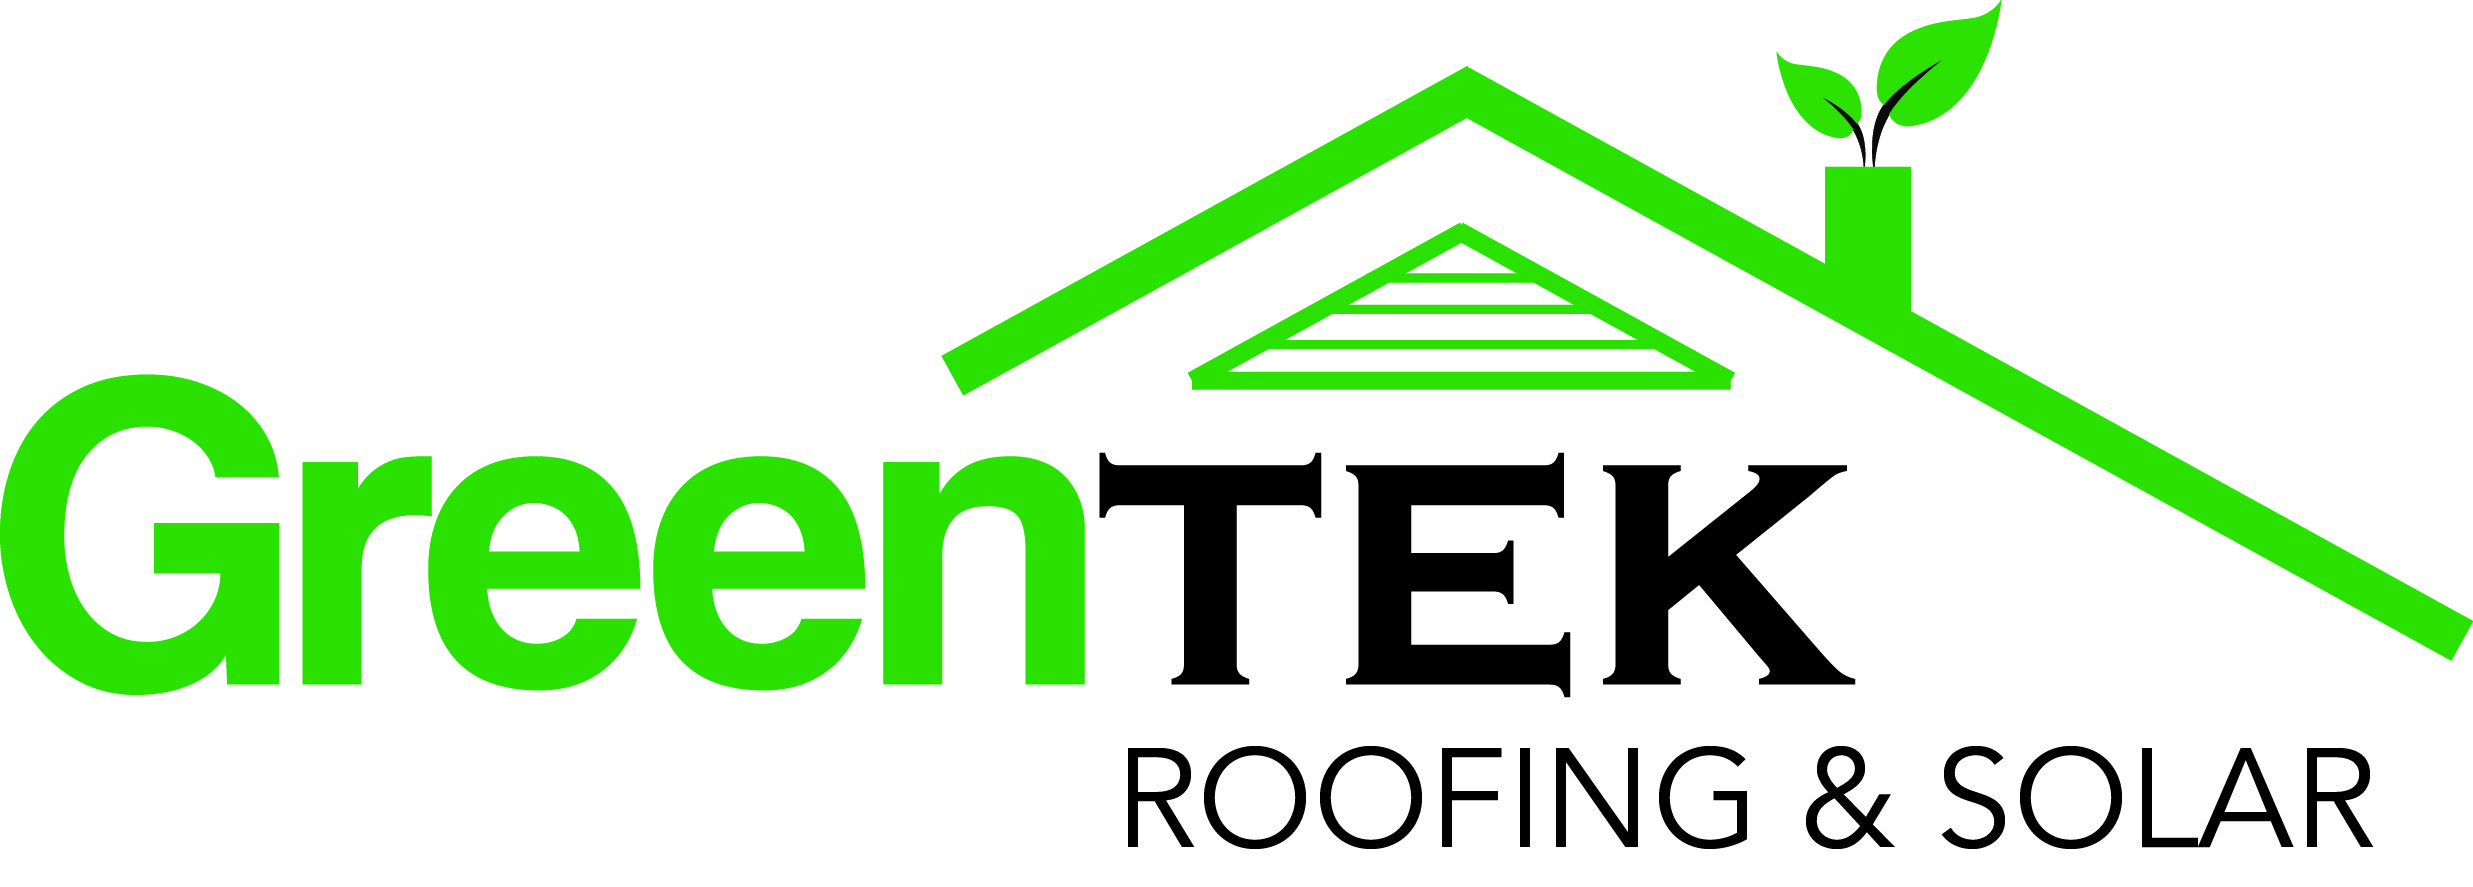 Greentek Roofing and Solar Explains How They Are Helping Residents to Invest in a Greener Tomorrow, Making Their Homes Energy Efficient